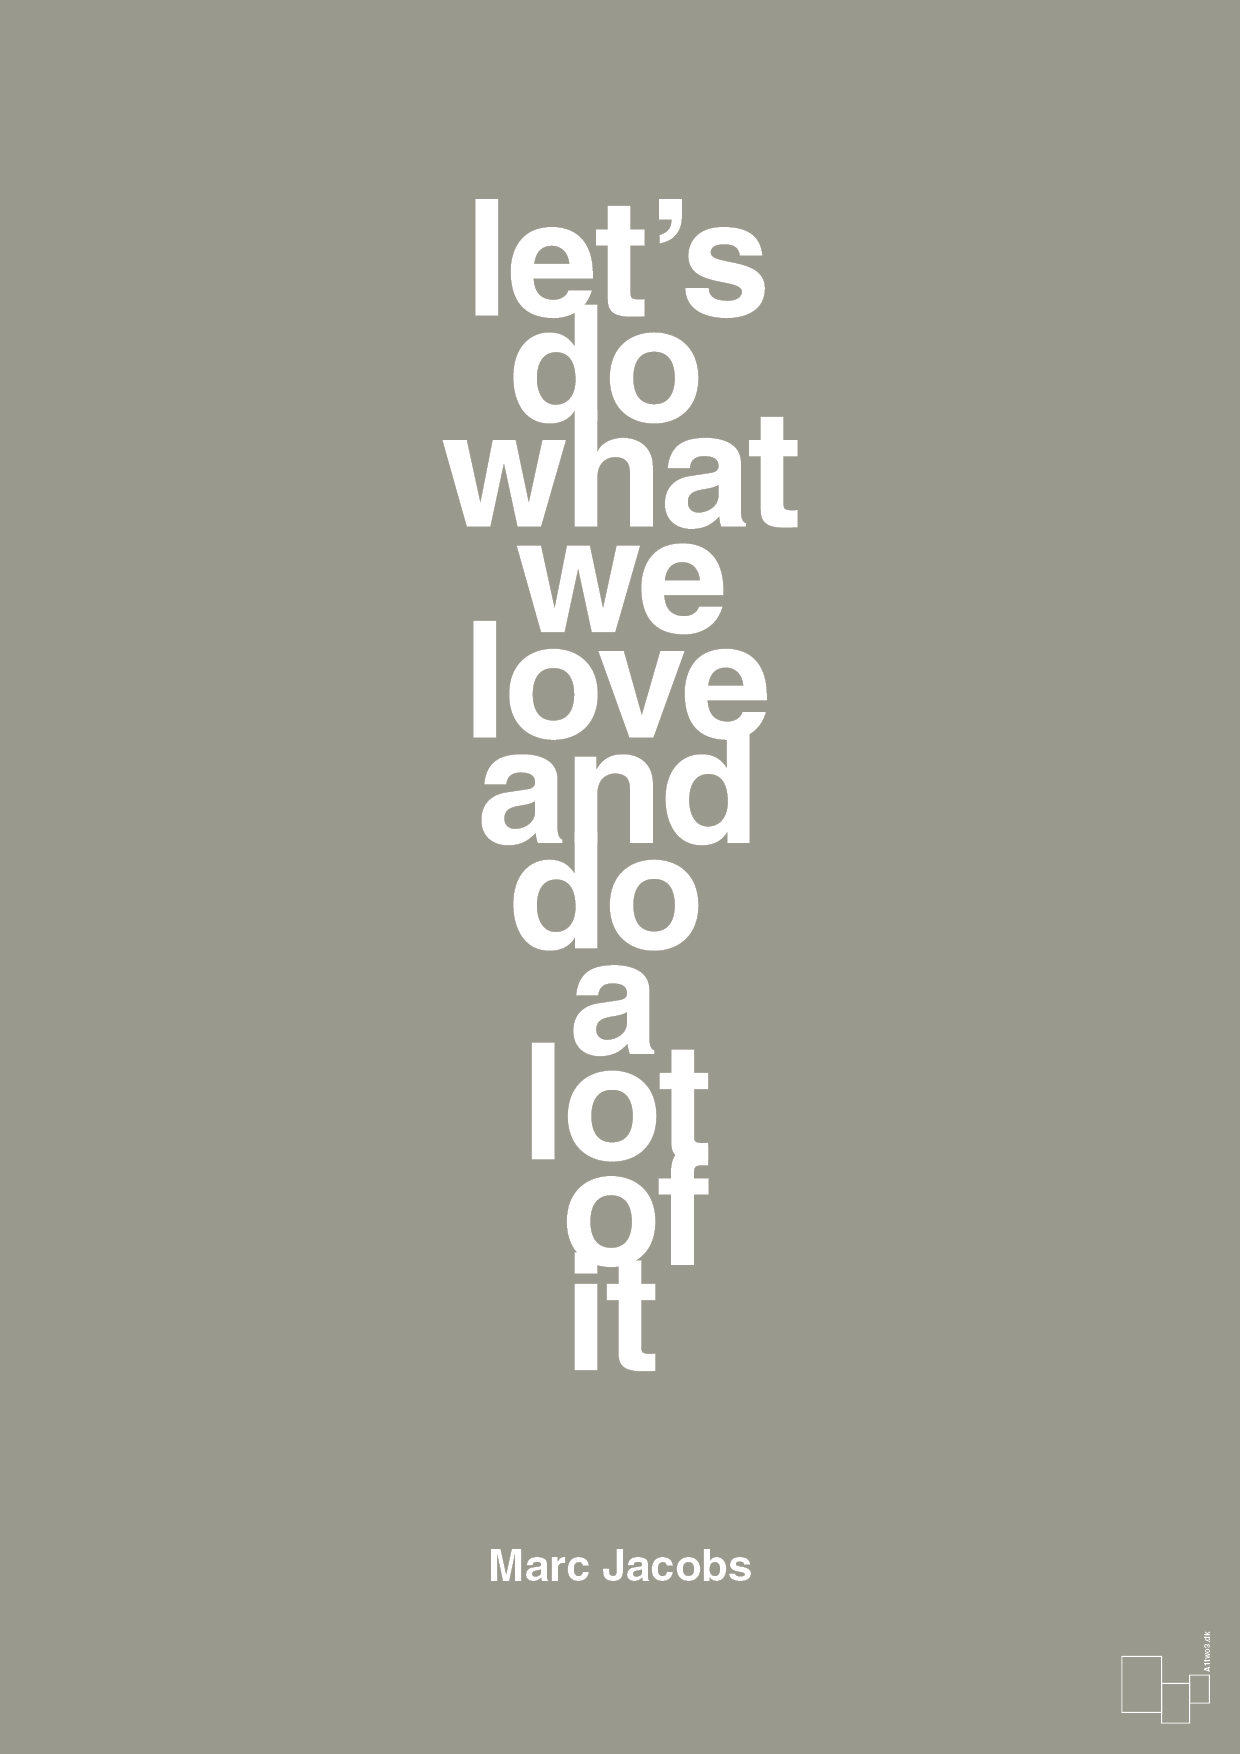 lets do what we love and do a lot of it - Plakat med Citater i Battleship Gray